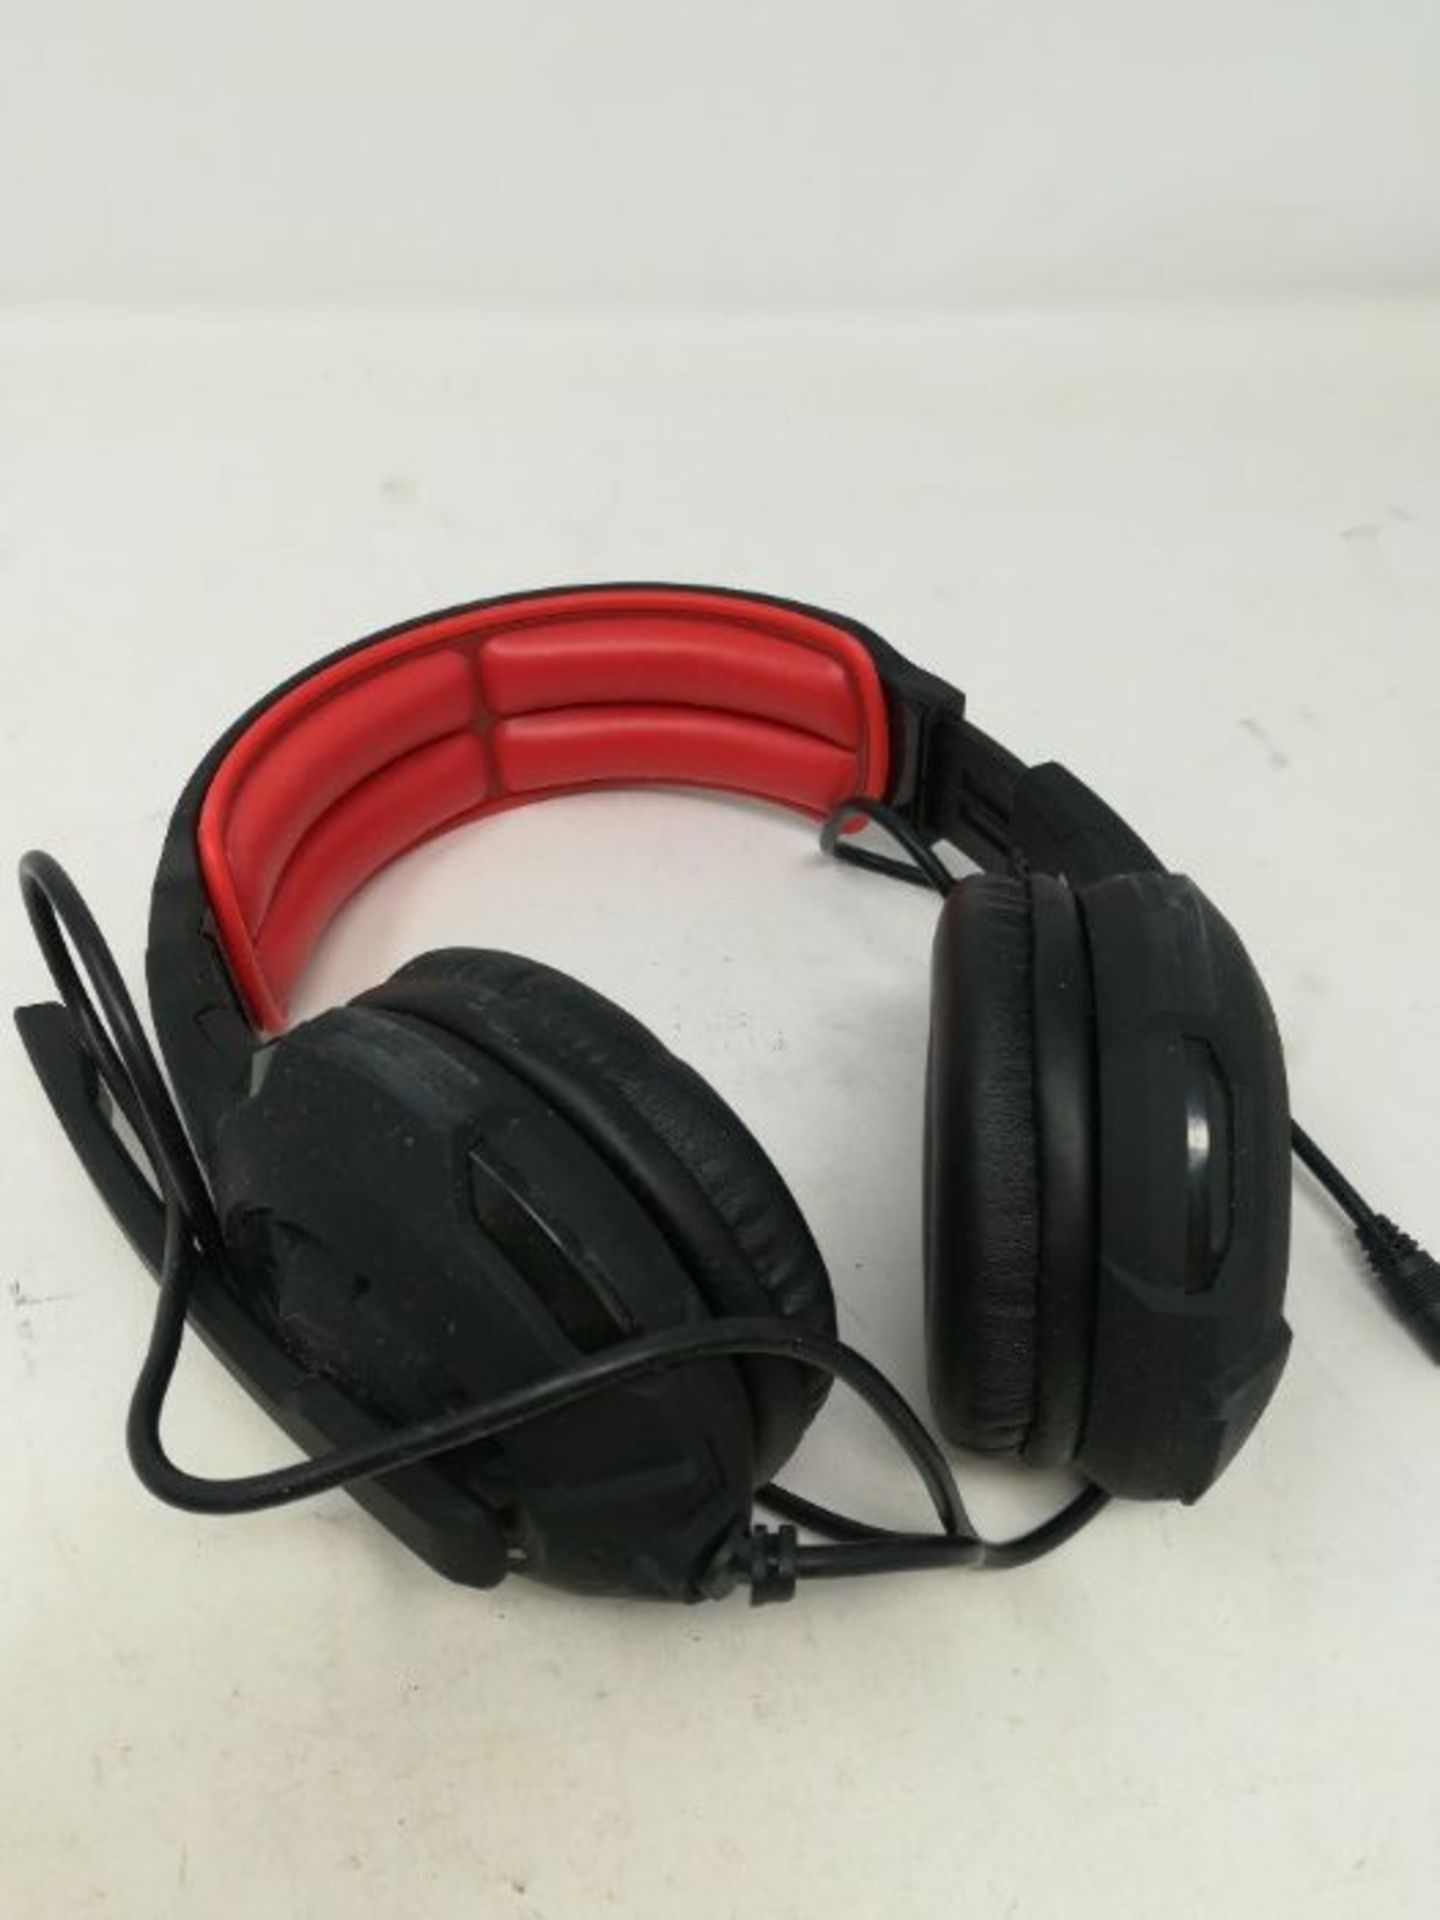 Trust Gaming Headset GXT 310 Radius with Microphone, Adjustable Mic and Headband, Wire - Image 2 of 2